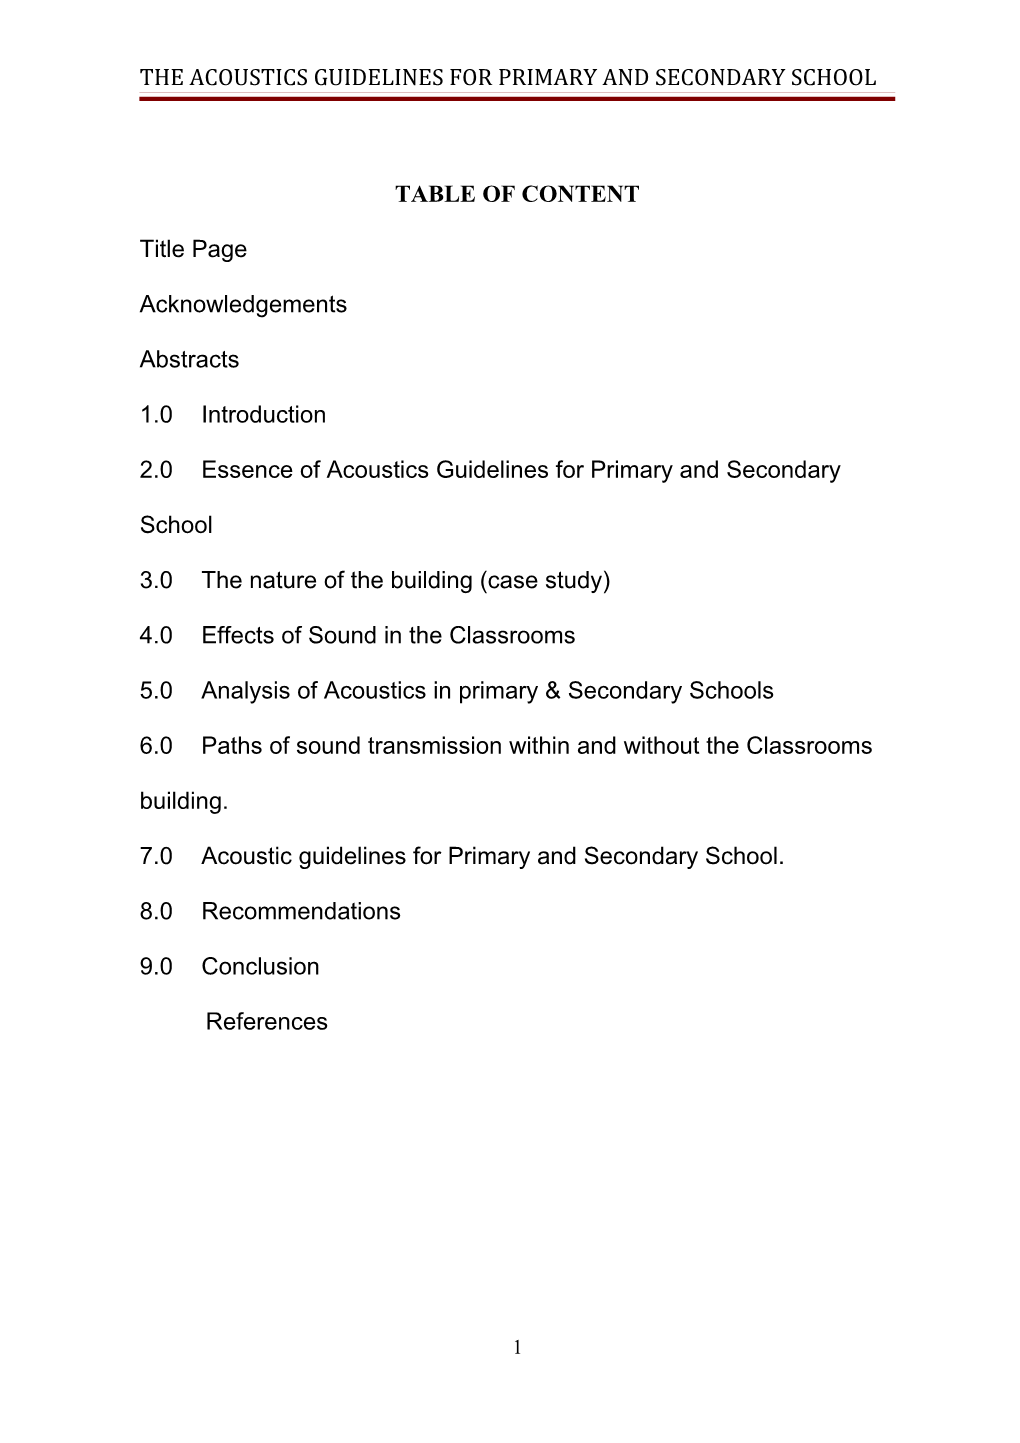 The Acoustics Guidelines for Primary and Secondary School